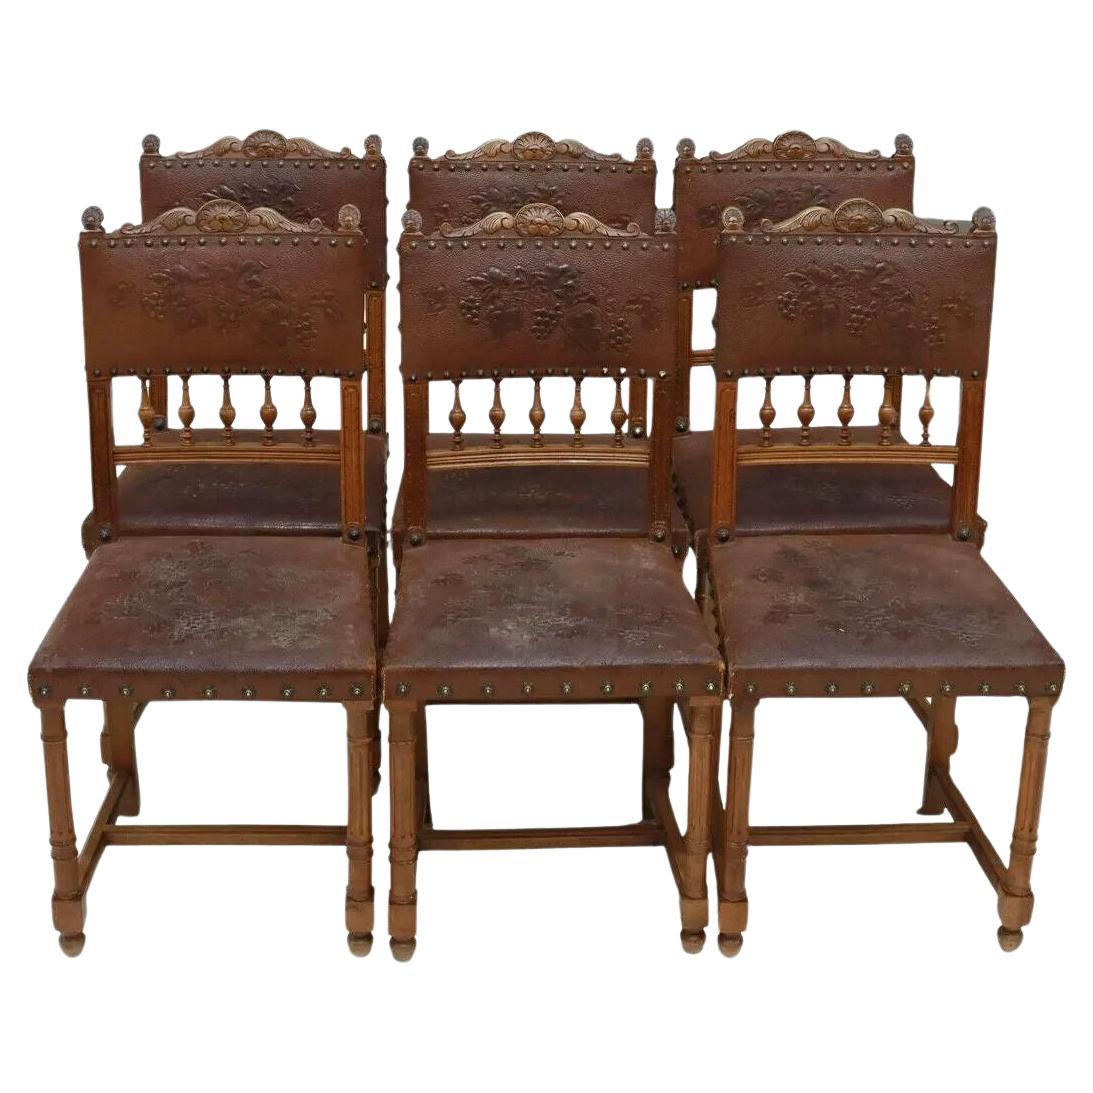 1800s Antique Leather, (6) French Henri II Style, Walnut Dining Chairs, Set of 6